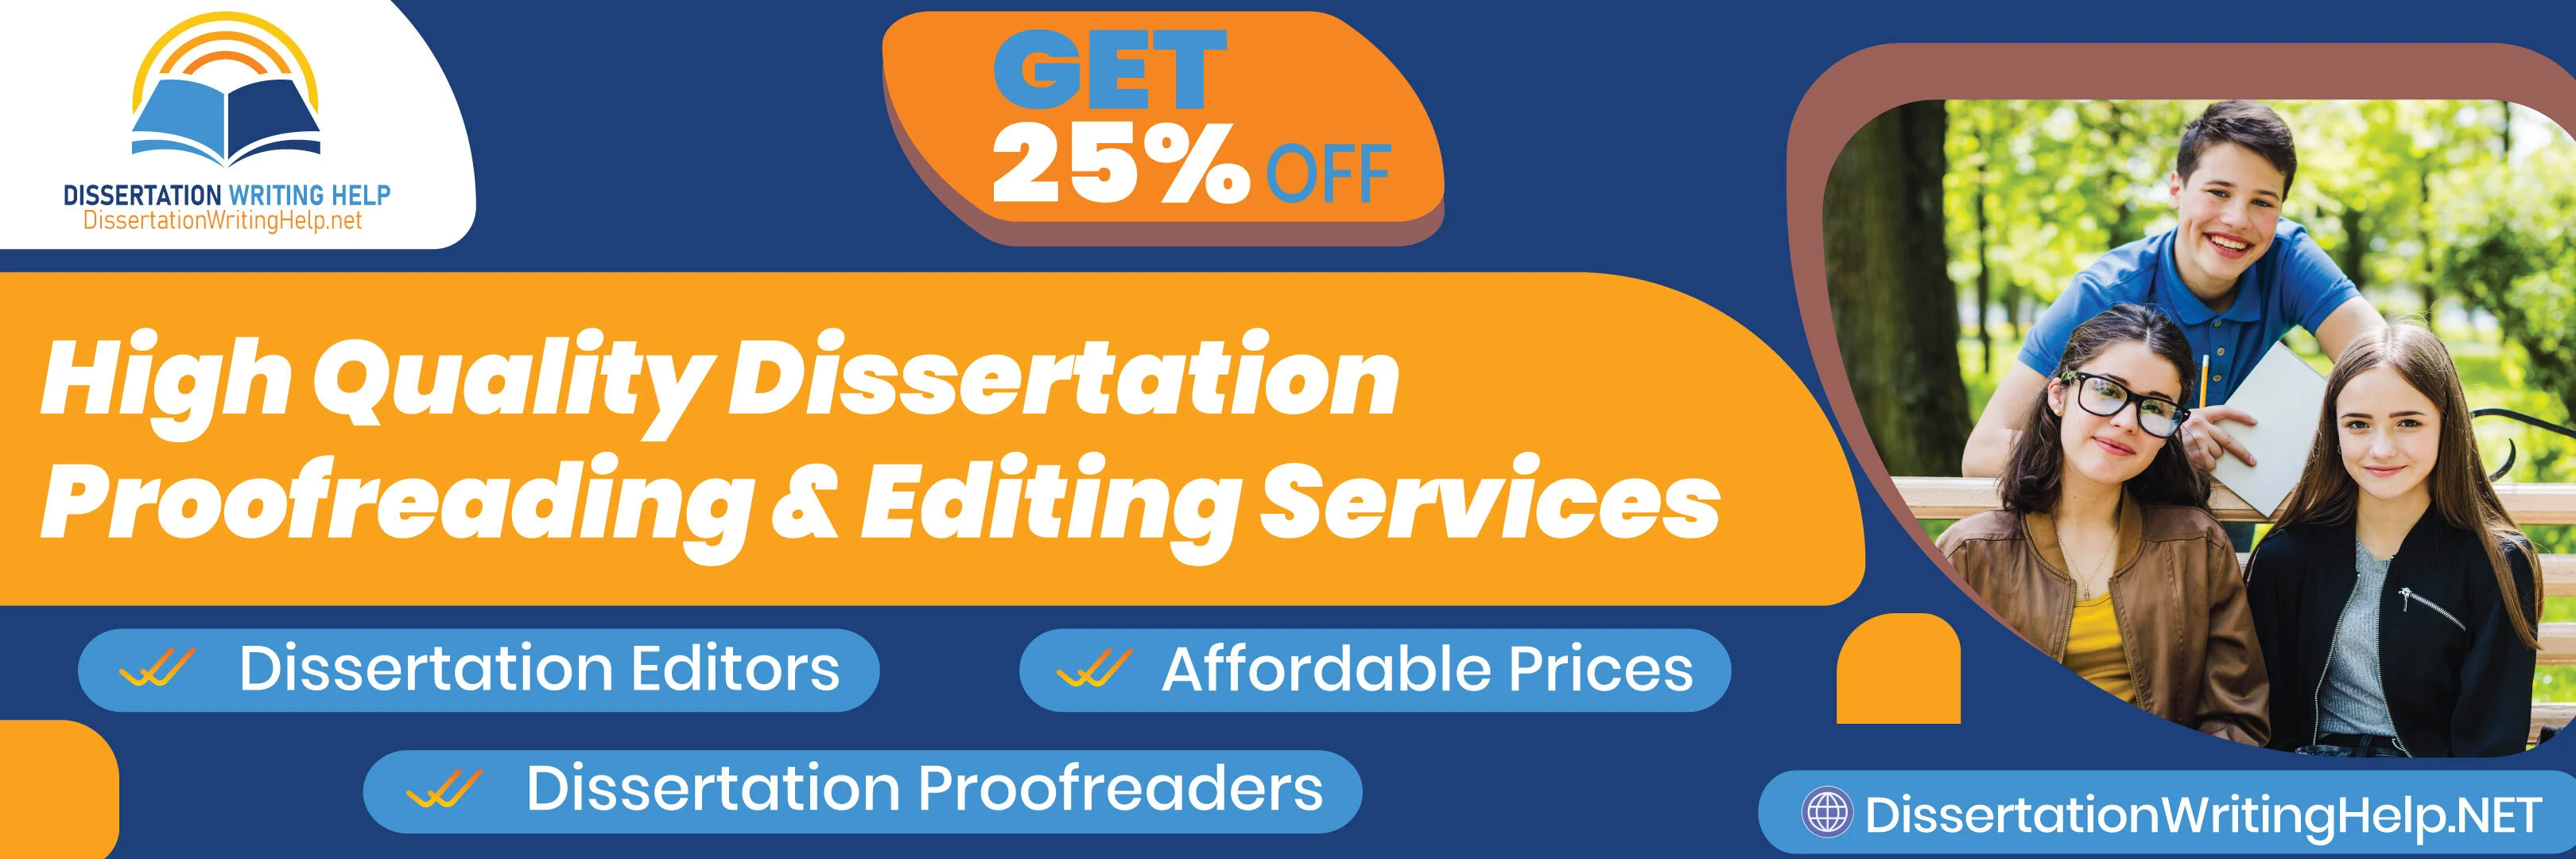 dissertation-editing-and-proofreading-services